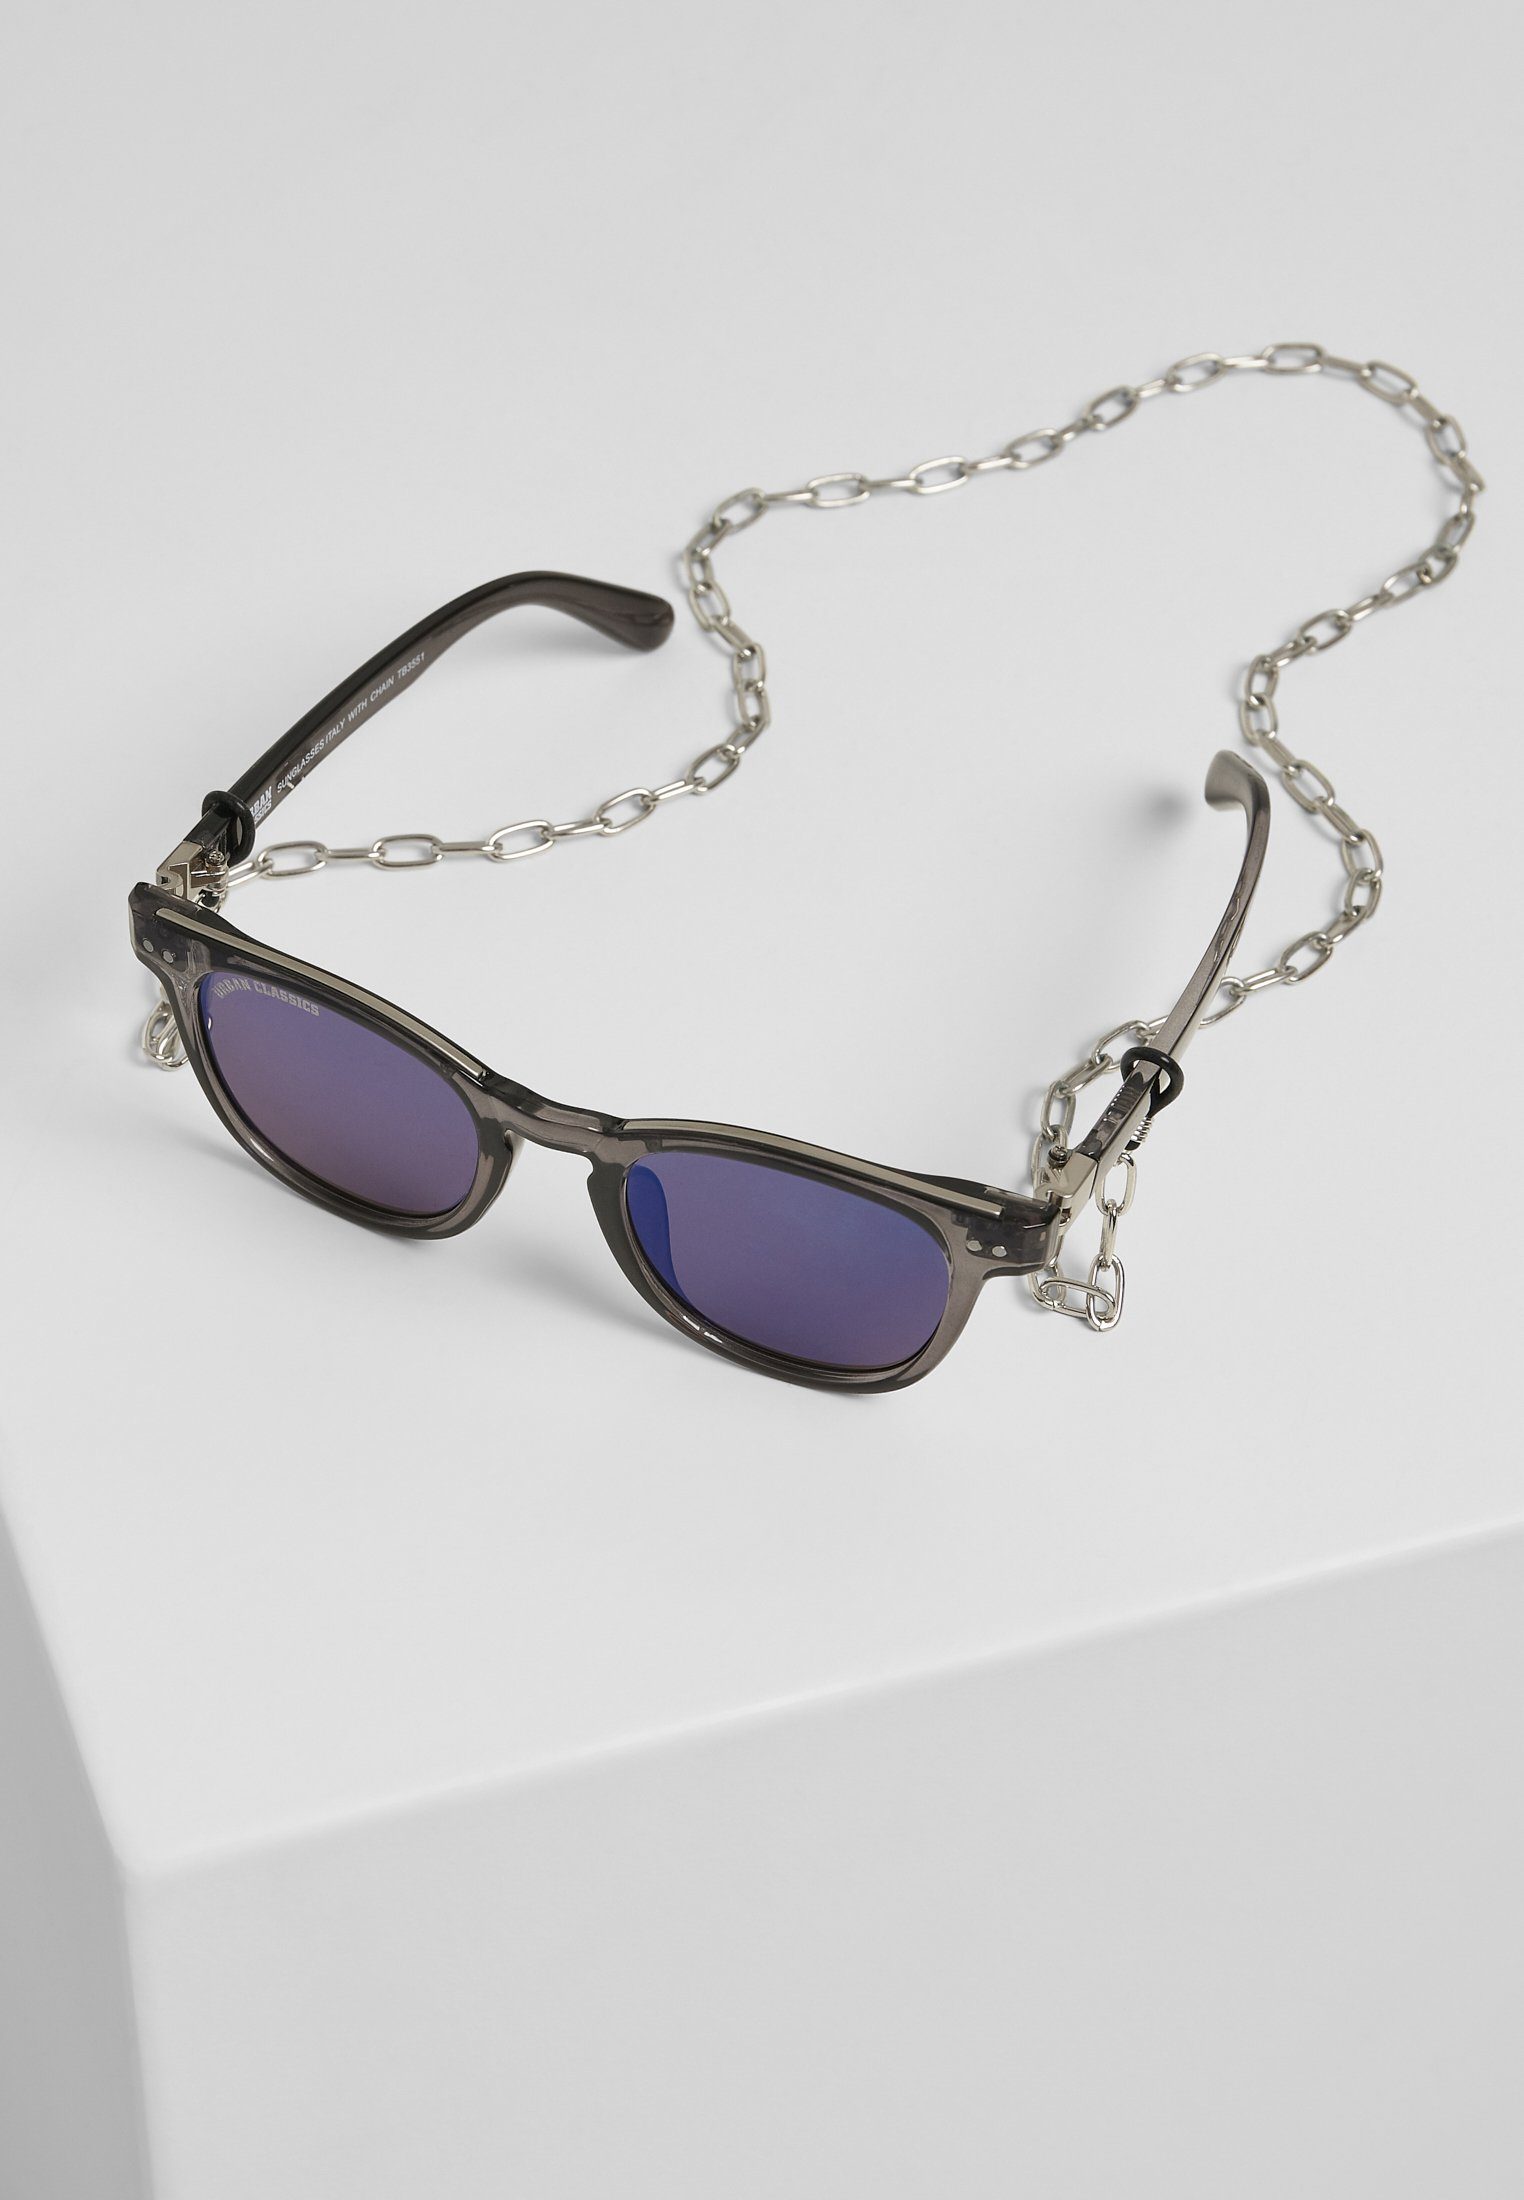 chain Italy with CLASSICS URBAN grey/silver/silver Unisex Sonnenbrille Sunglasses